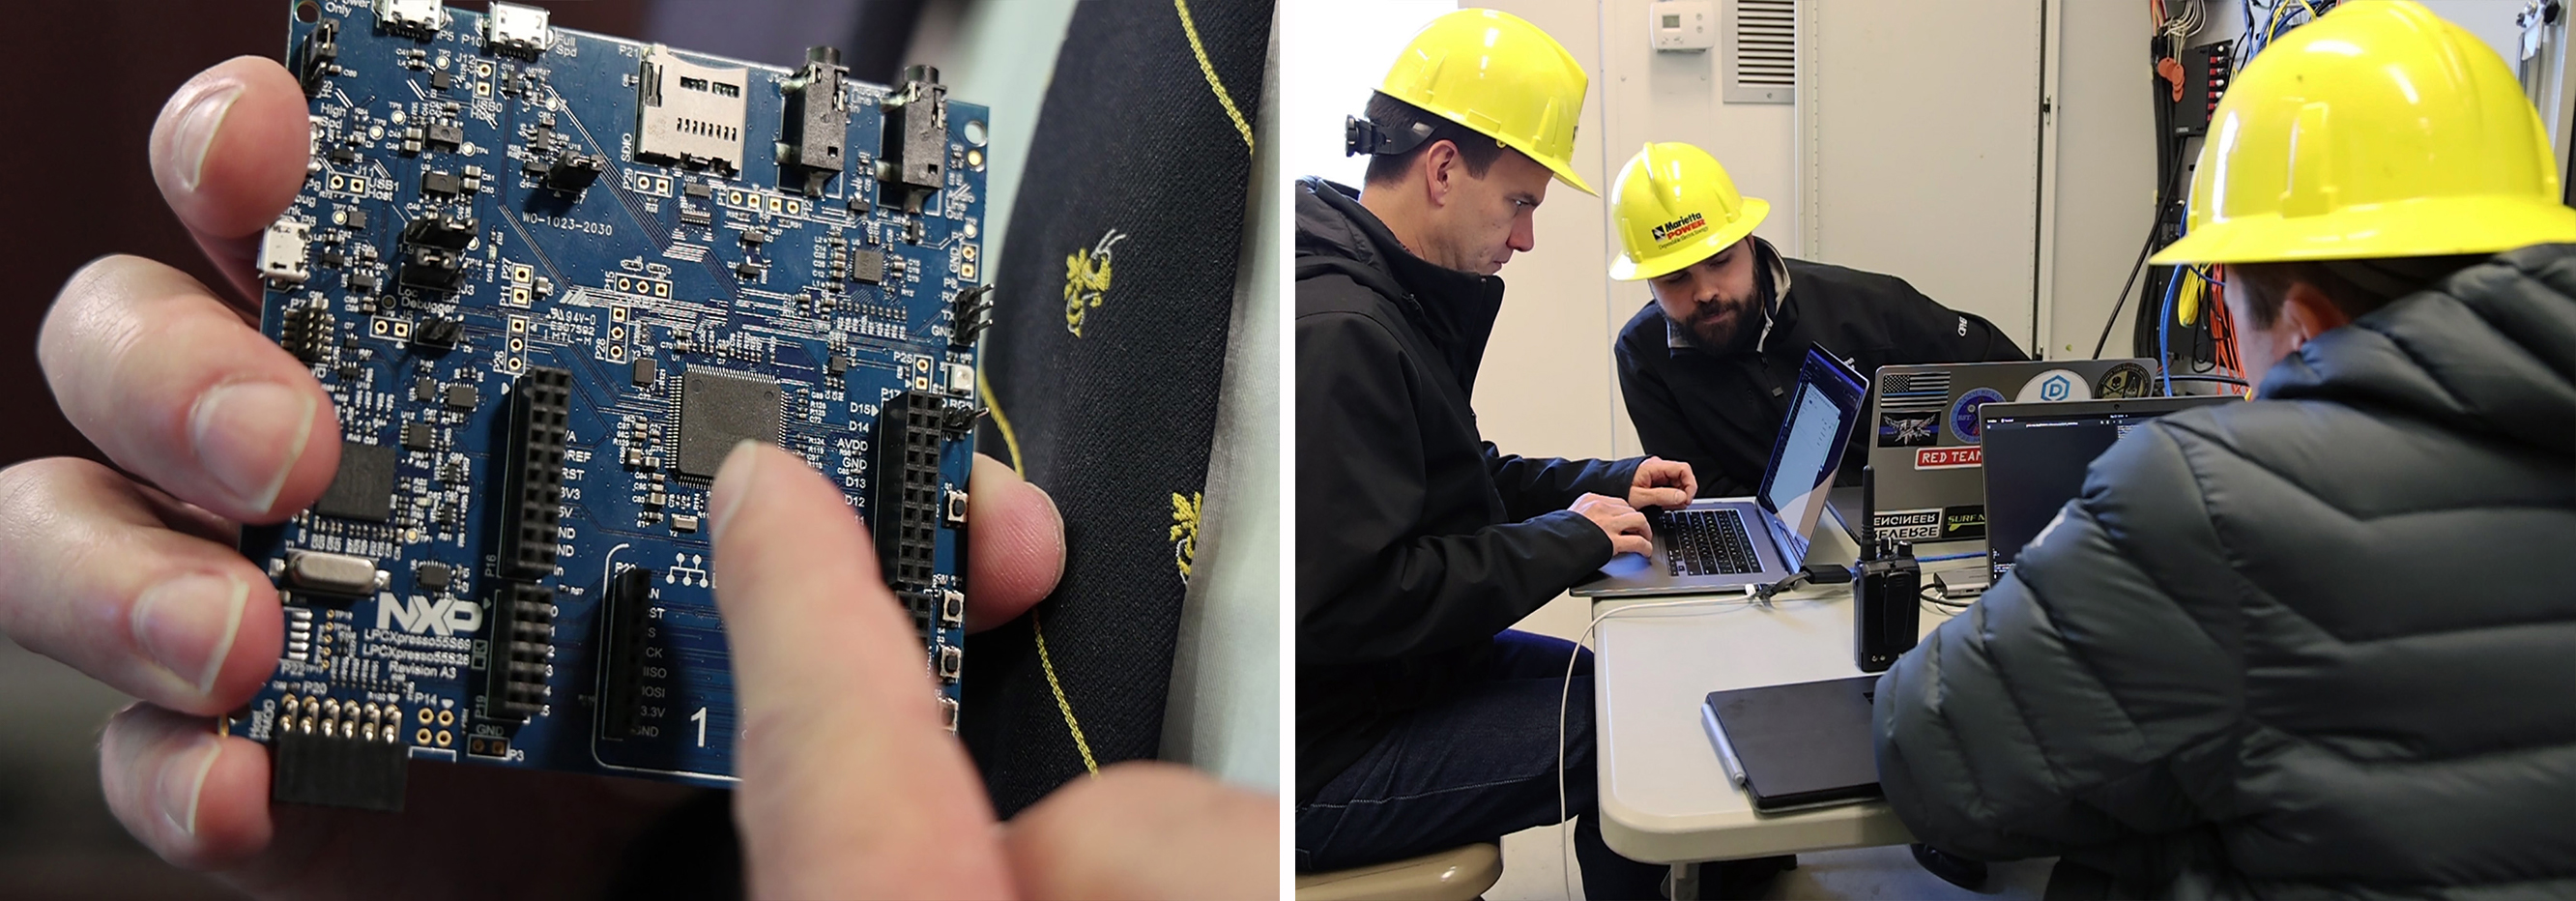 Two side by side photos. One shows circuit board held in a man's hand. The other shows a group of three men wearing yellow hard hats sitting at a table looking at their laptop computers.